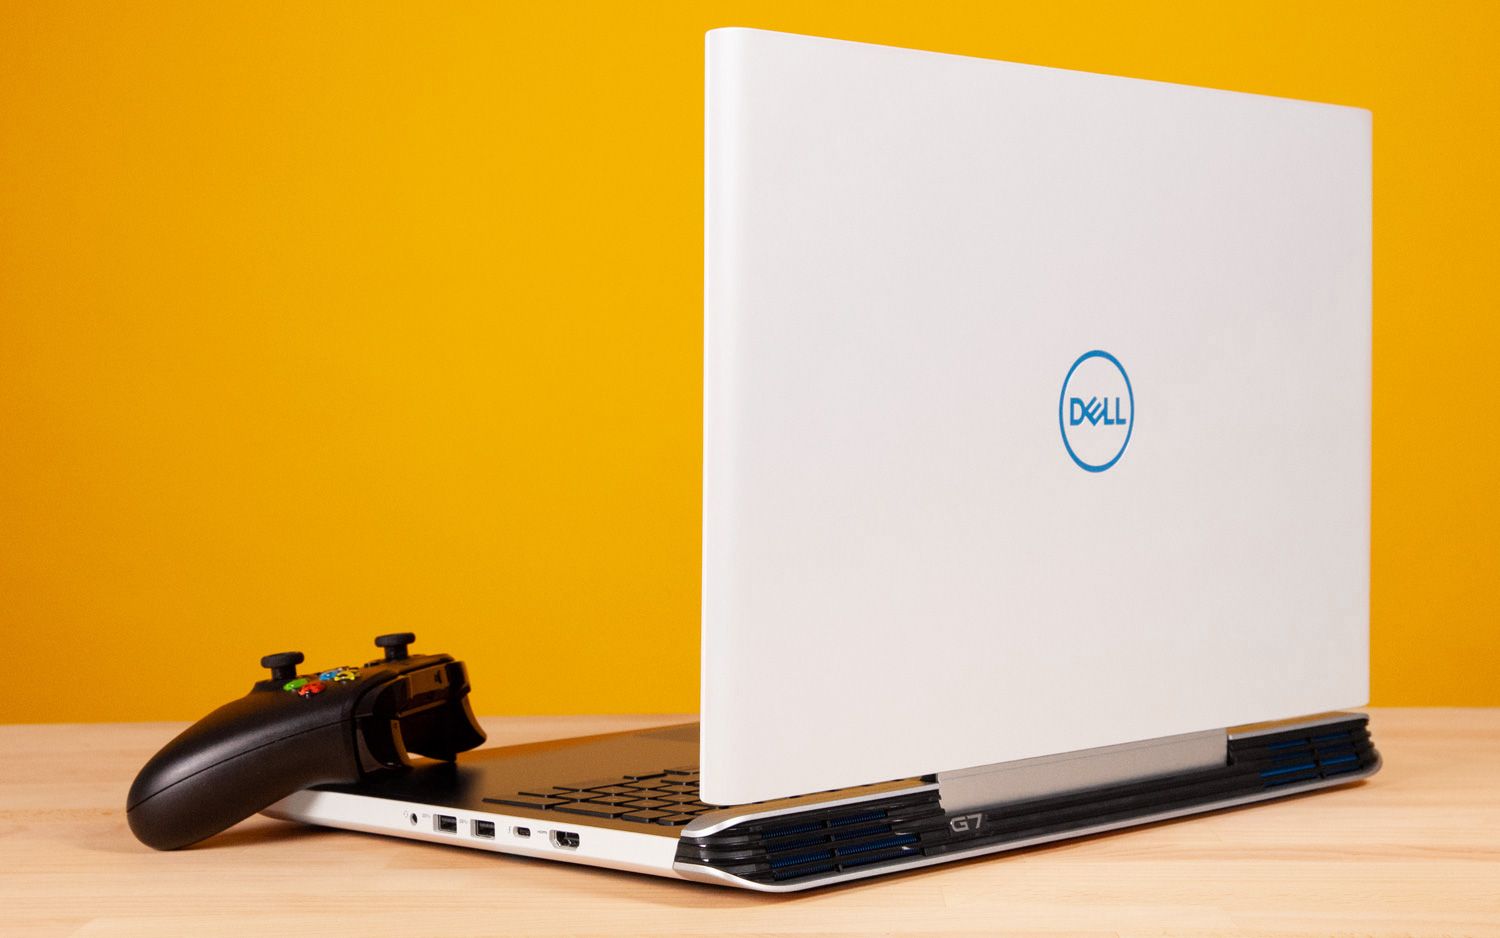 Dell G7 15 (2018) Gaming Laptop Review: Striking design 